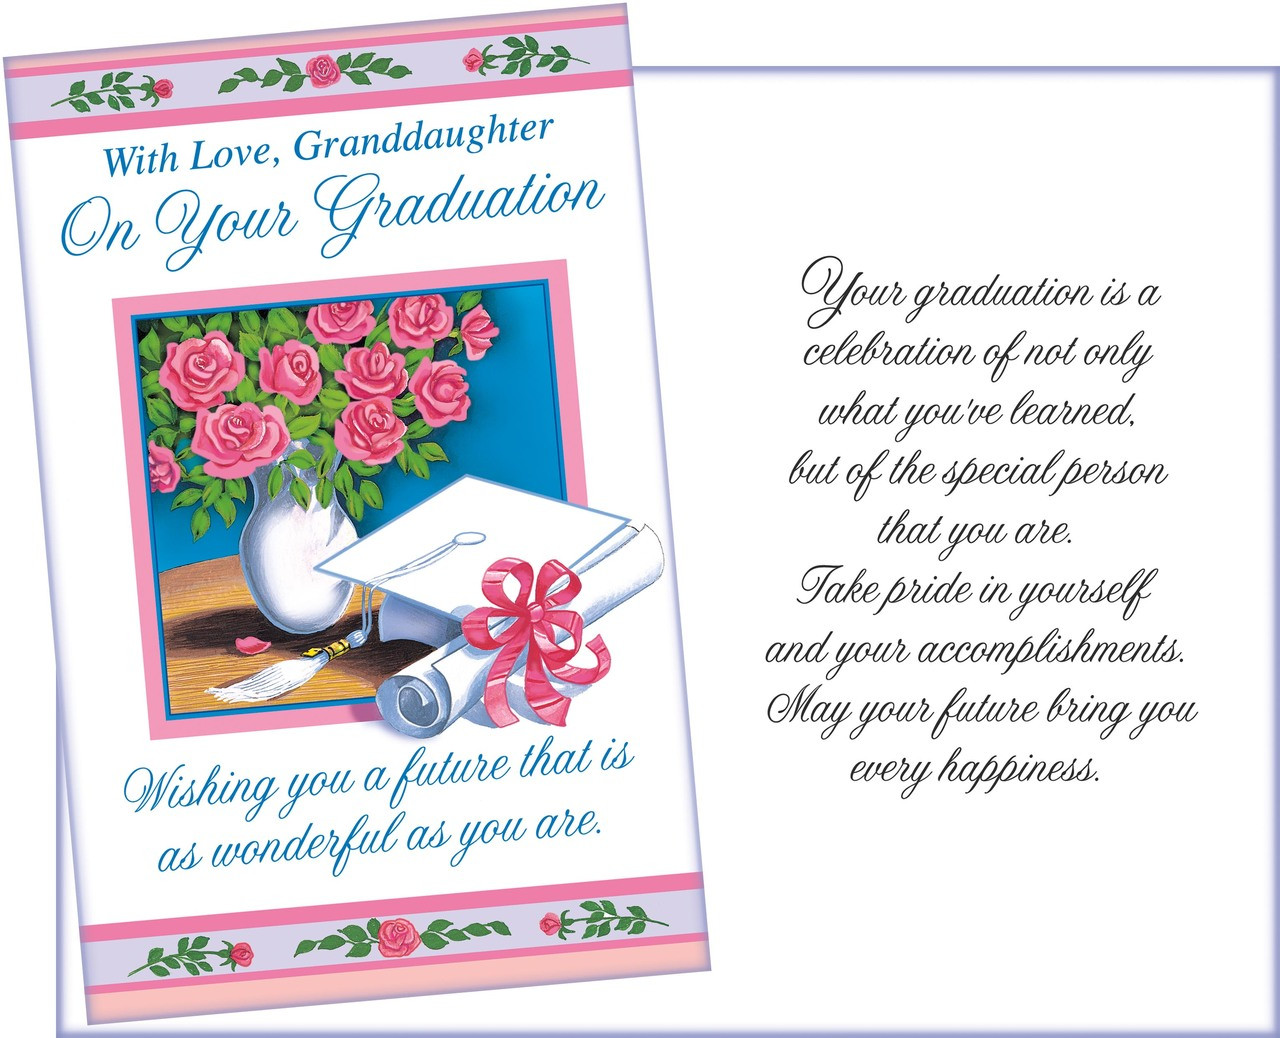 36067 six graduation granddaughter greeting cards with six envelopes